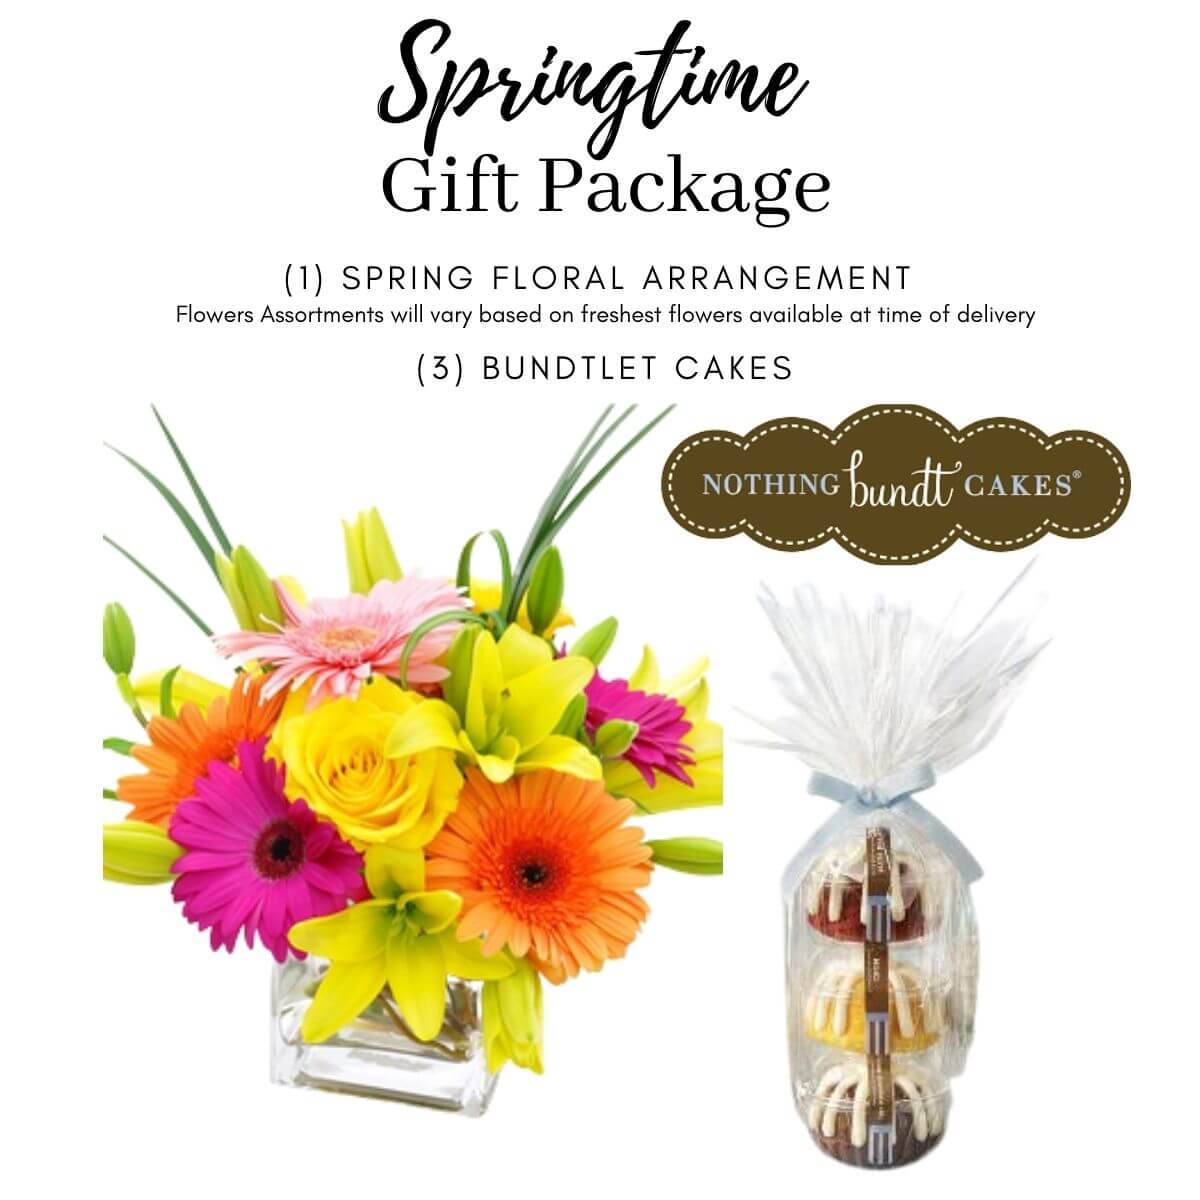 Springtime - Gift Package